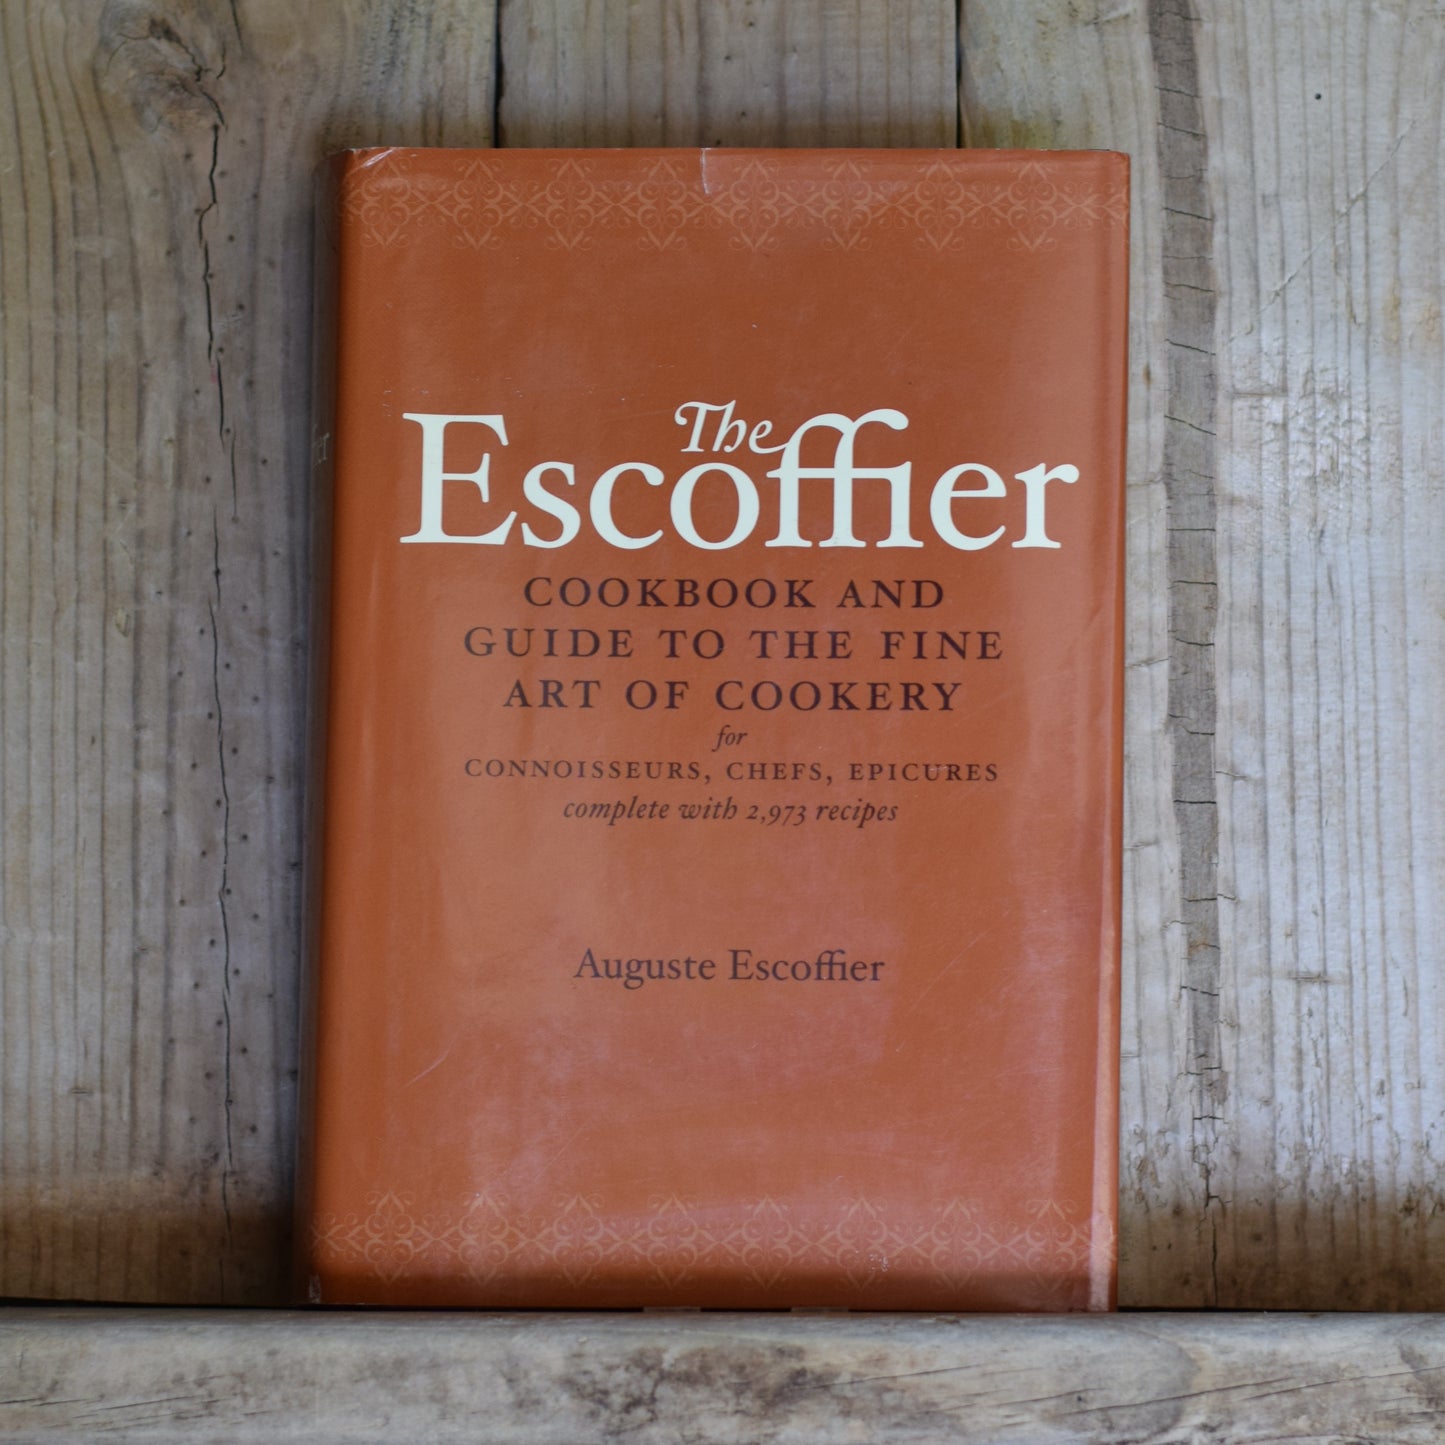 Vintage Hardback Cookbook: Auguste Escoffier - The Escoffier Cookbook and Guide to the Fine Art of Cookery